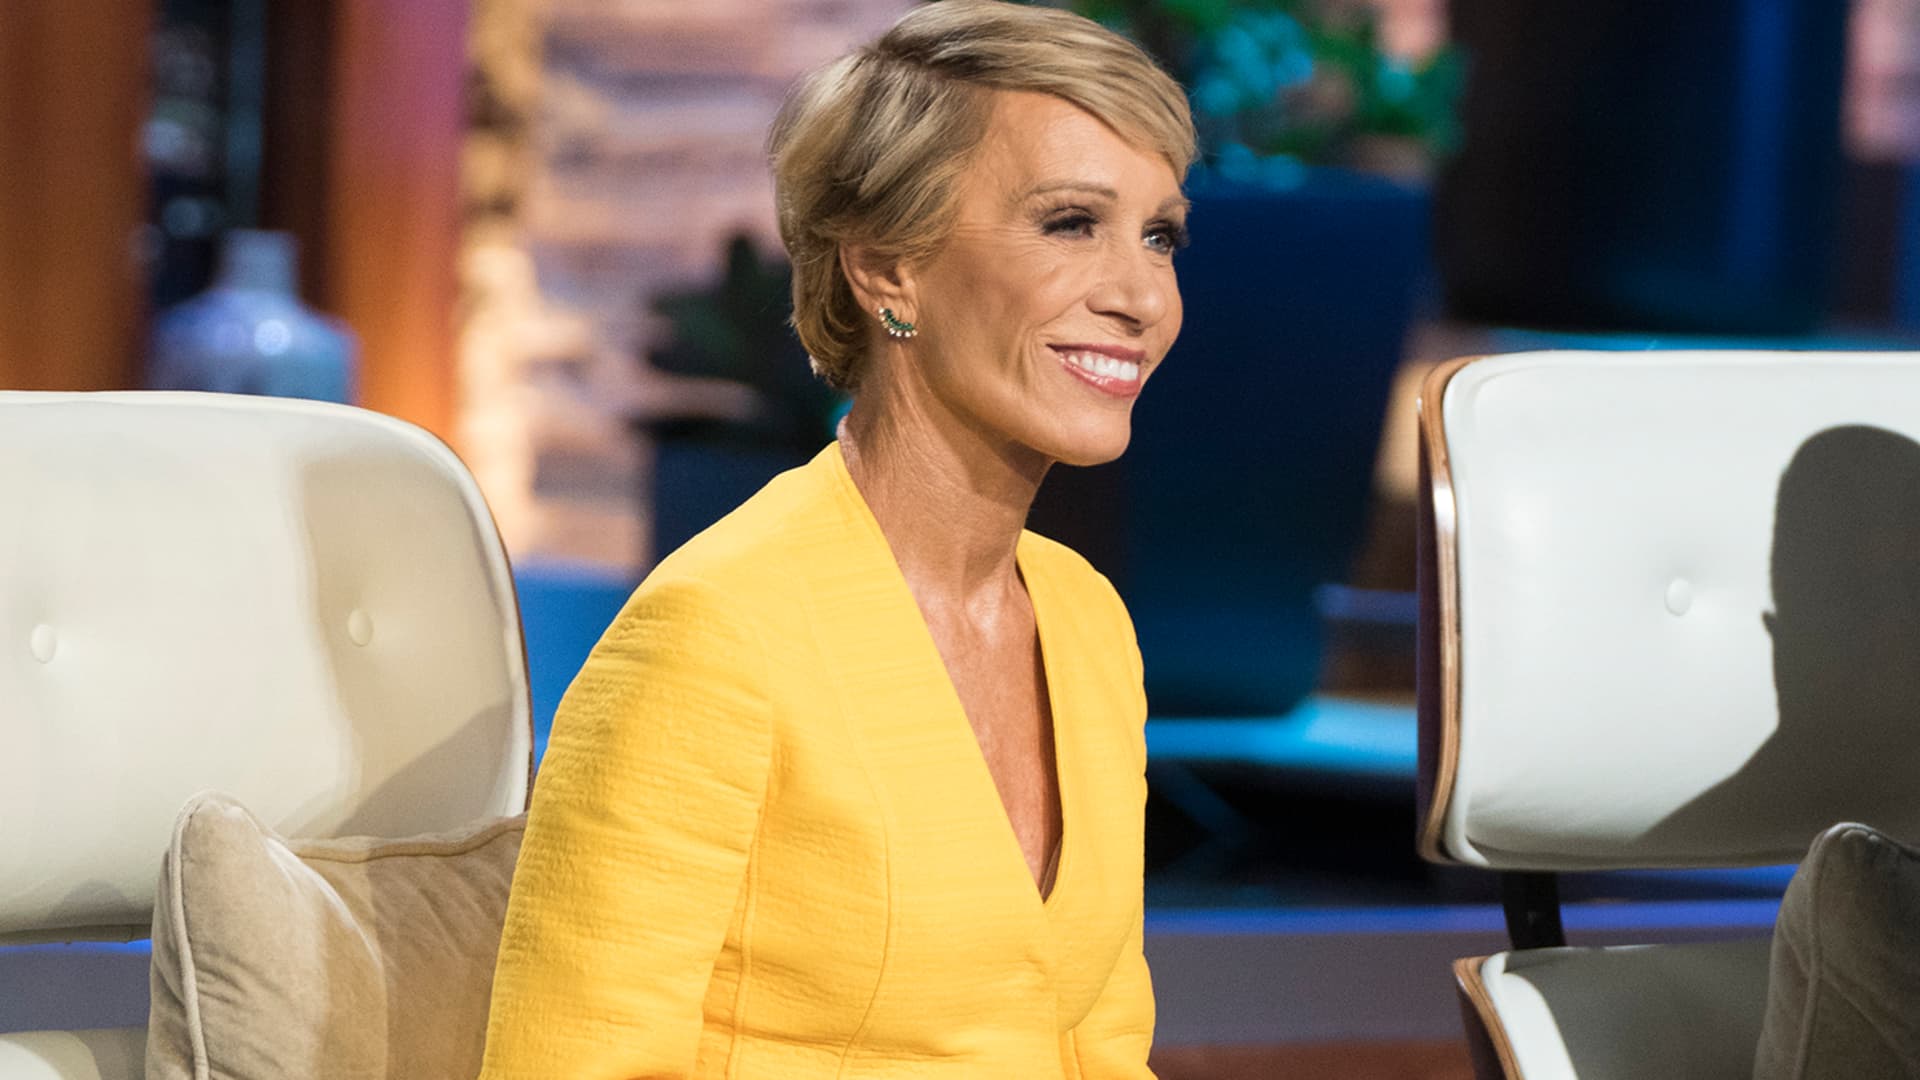 'I went out and bought my parents a car': Barbara Corcoran on the first time she felt successful